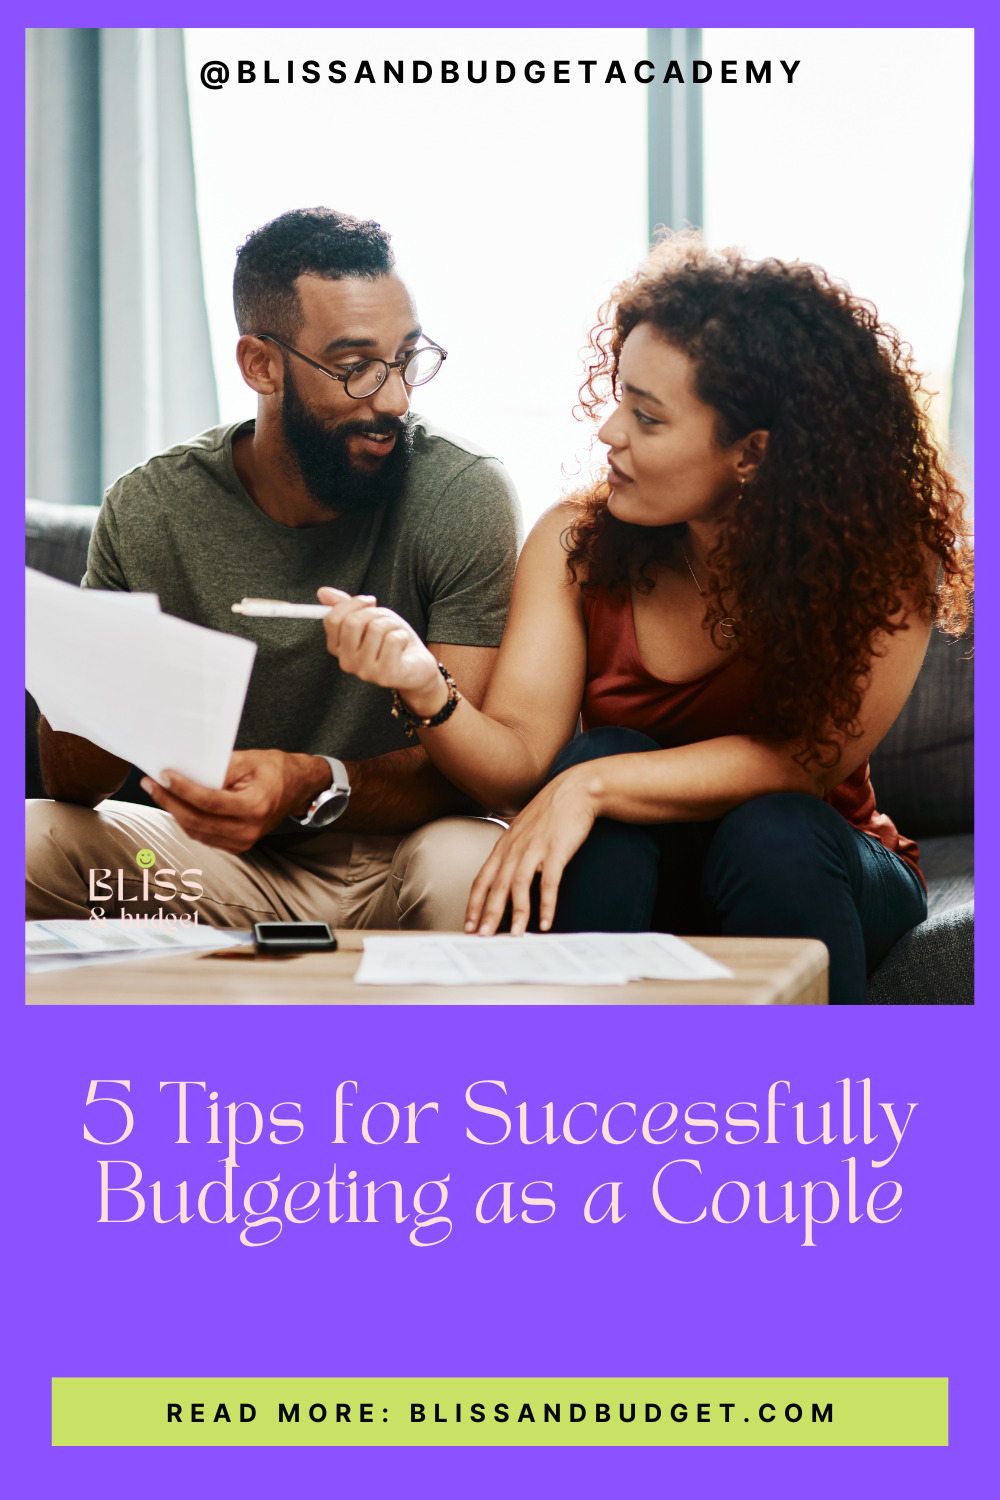 5 Tips for Successfully Budgeting as a Couple